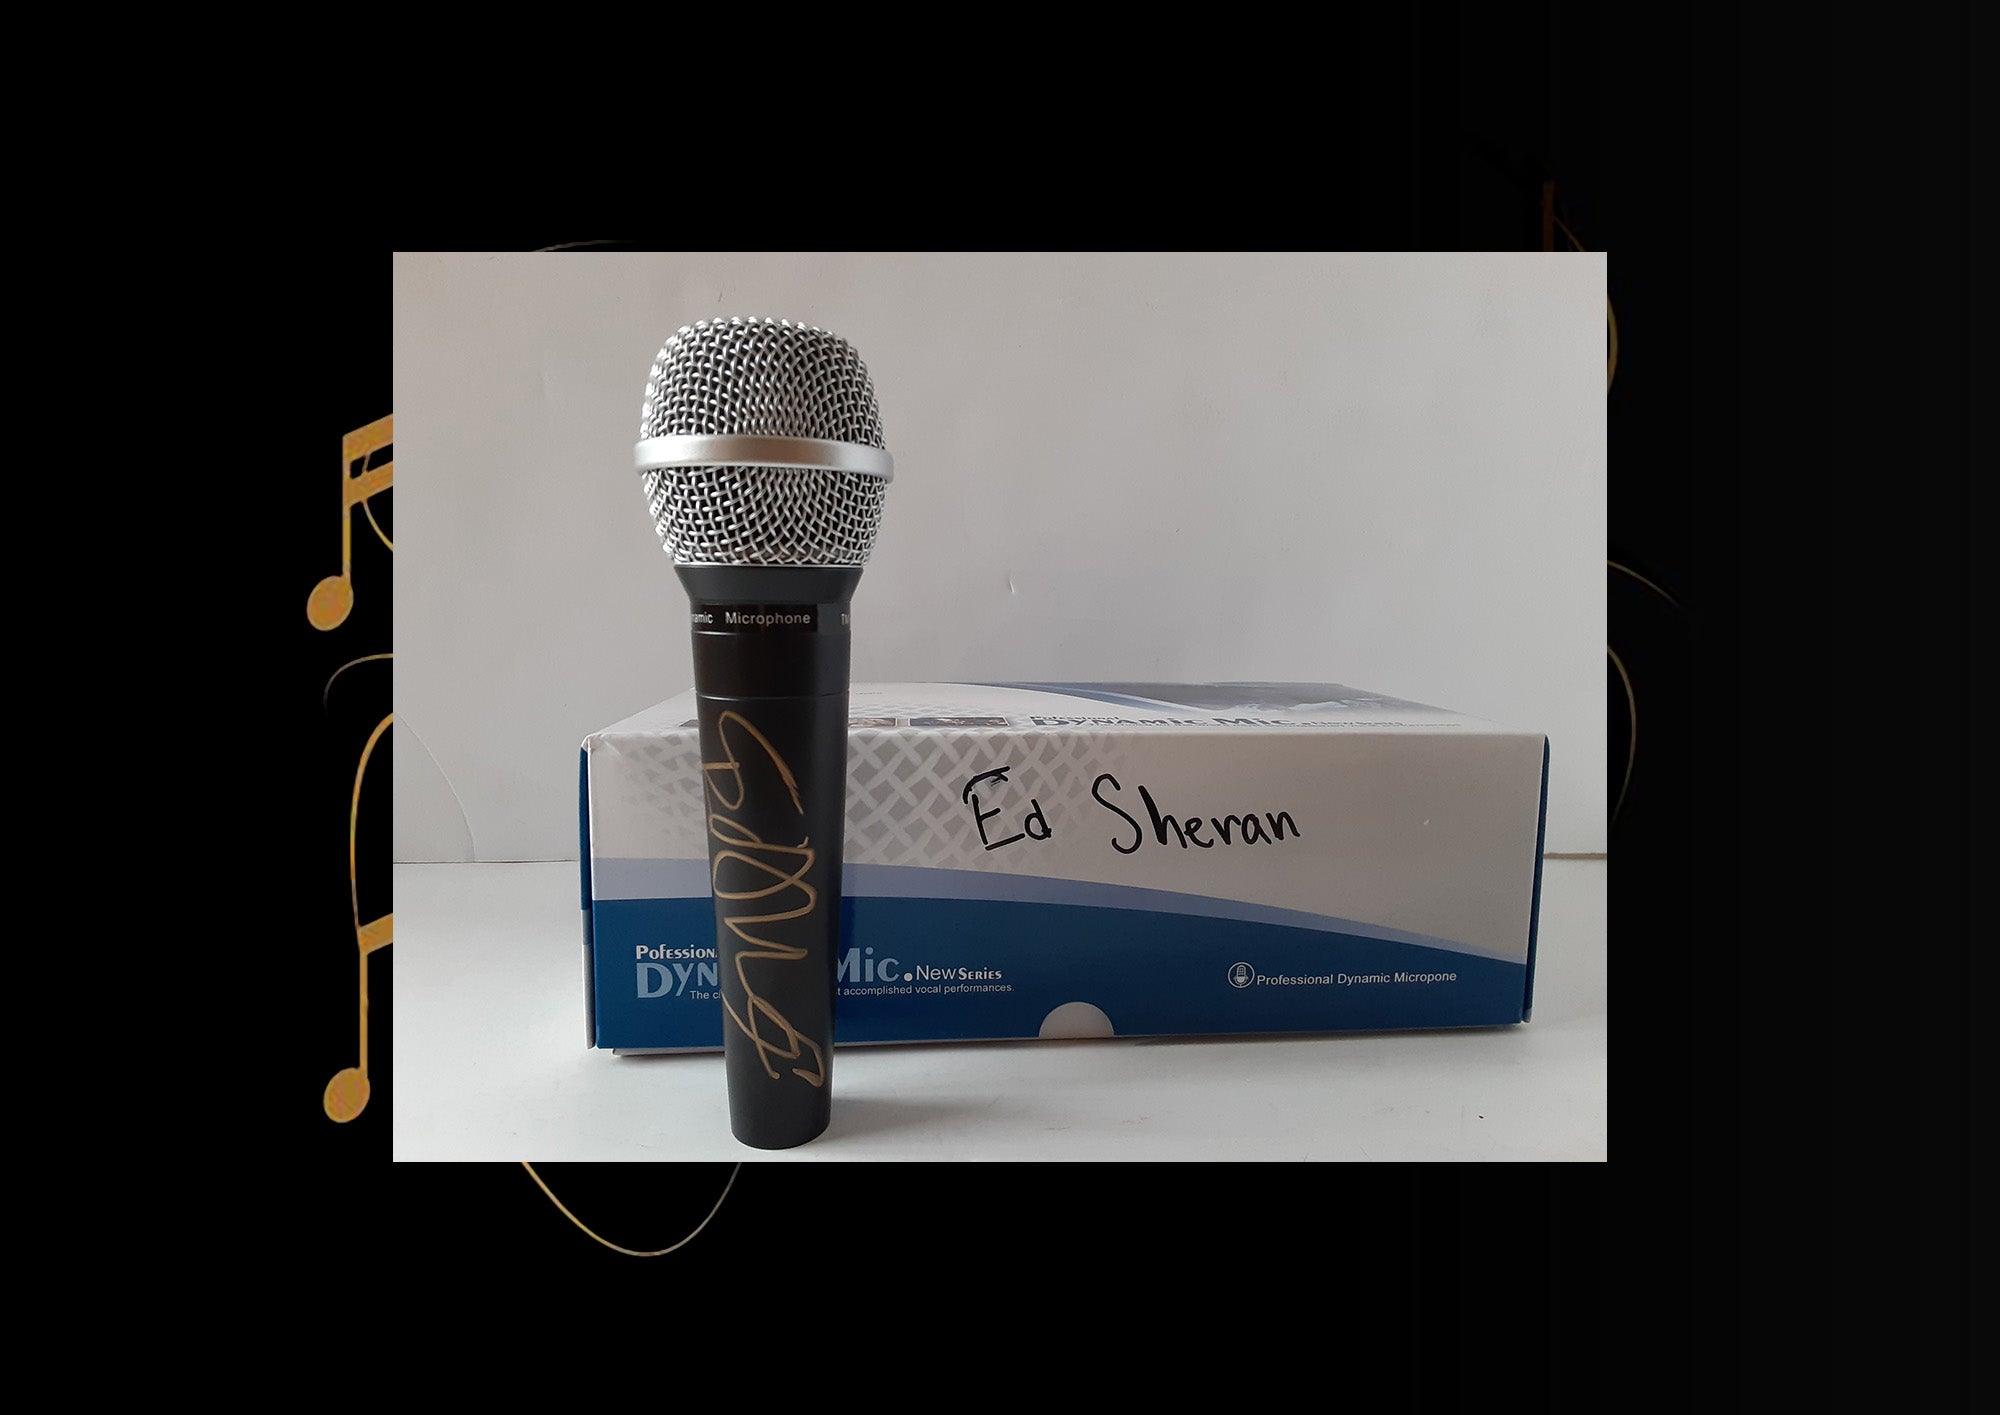 Ed Sheeran signed microphone with proof